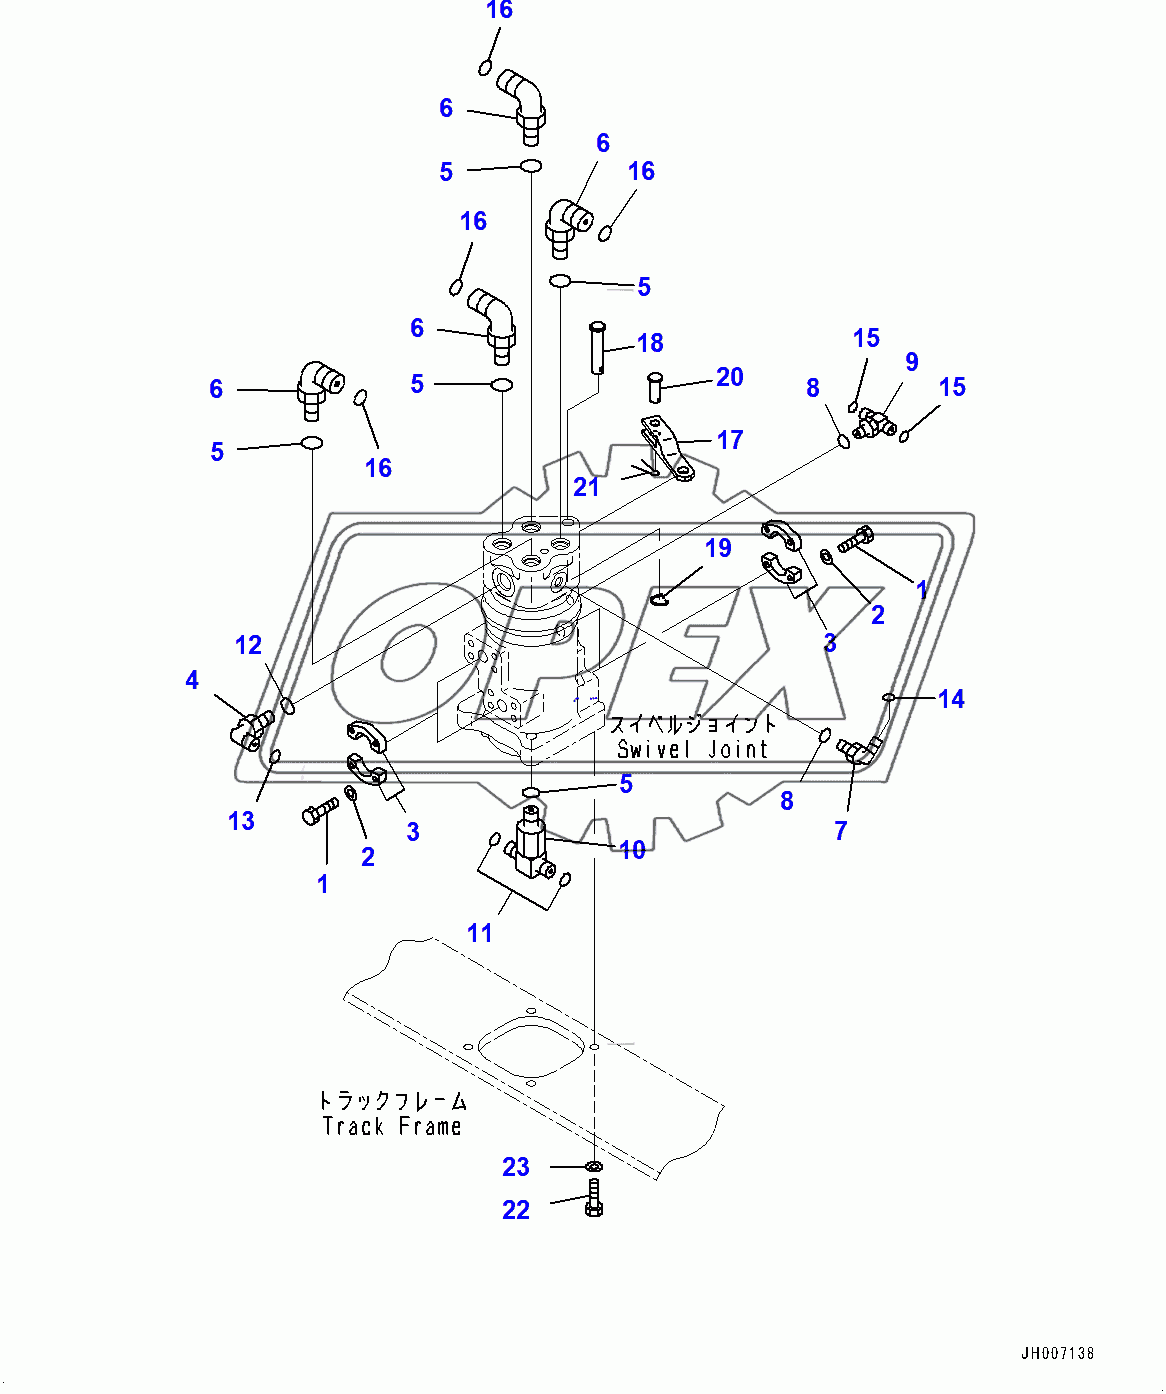  Swivel Joint, Connecting Parts (400001-)